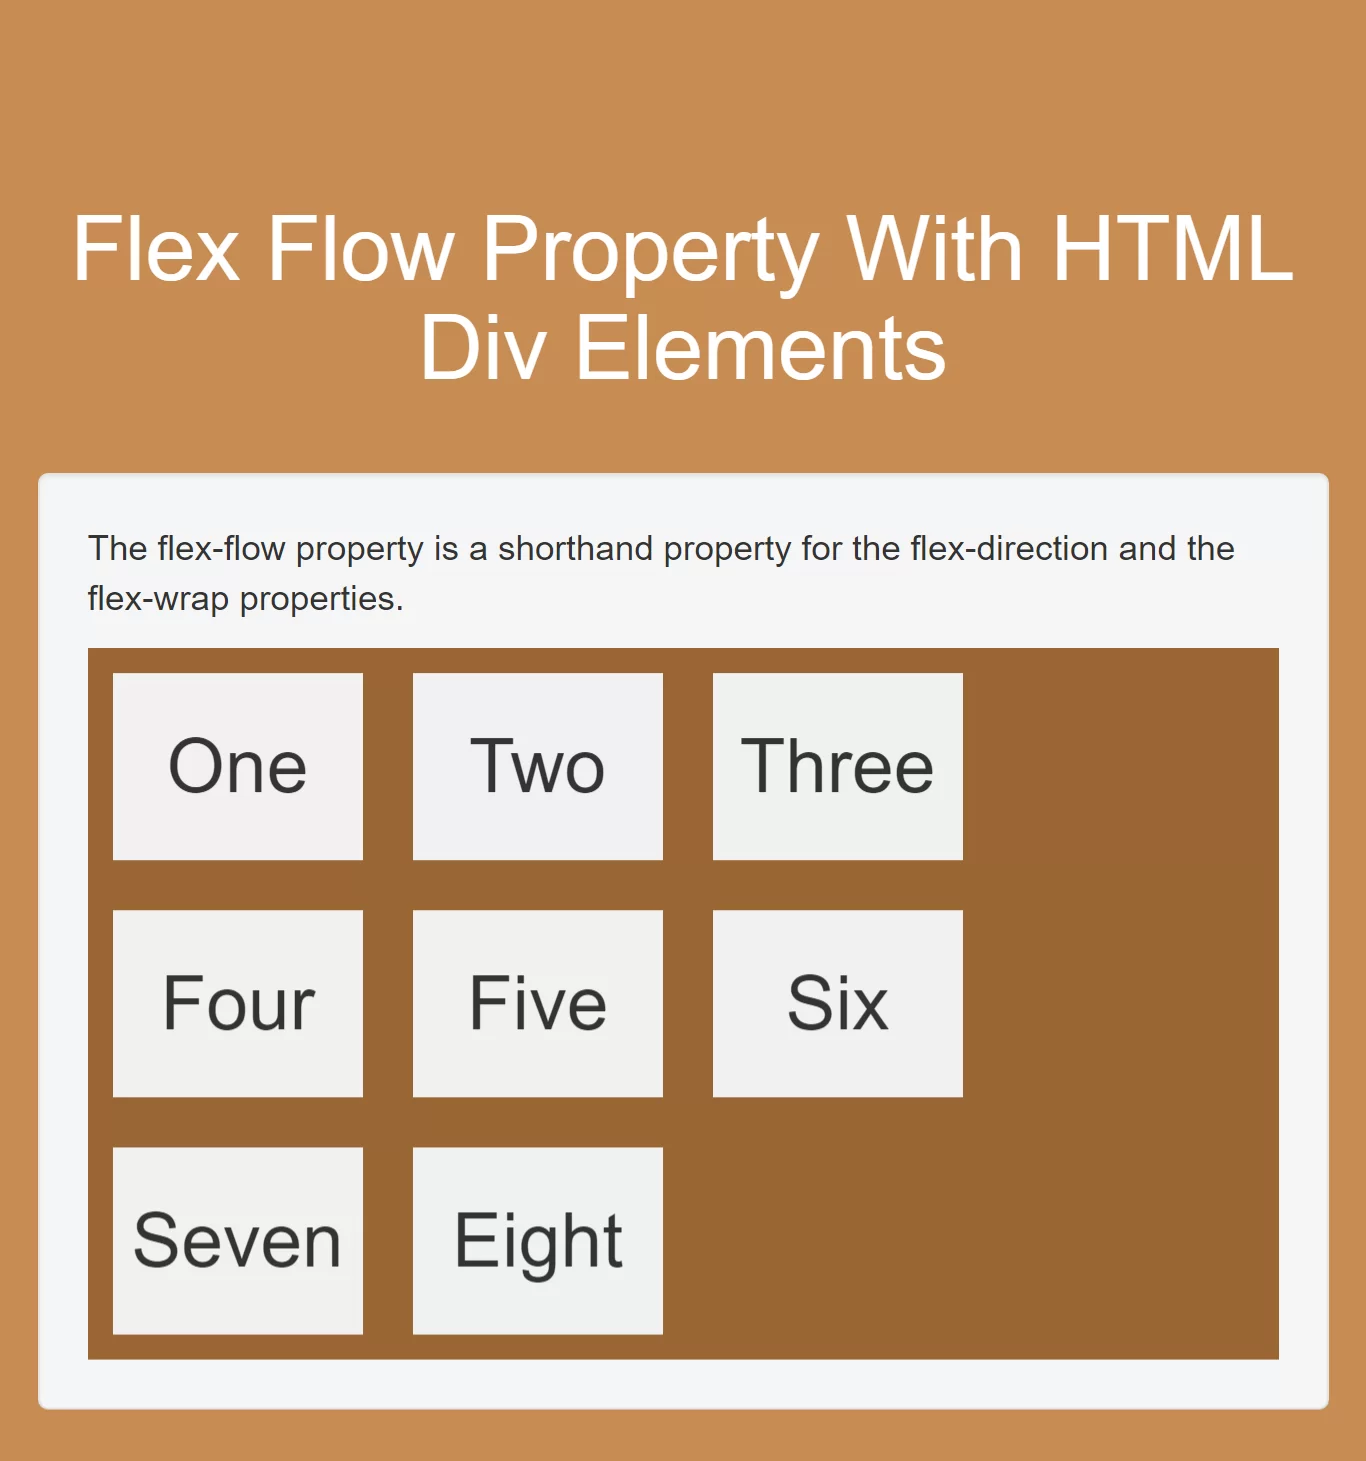 How To Use Flex Flow Property With HTML Div Elements